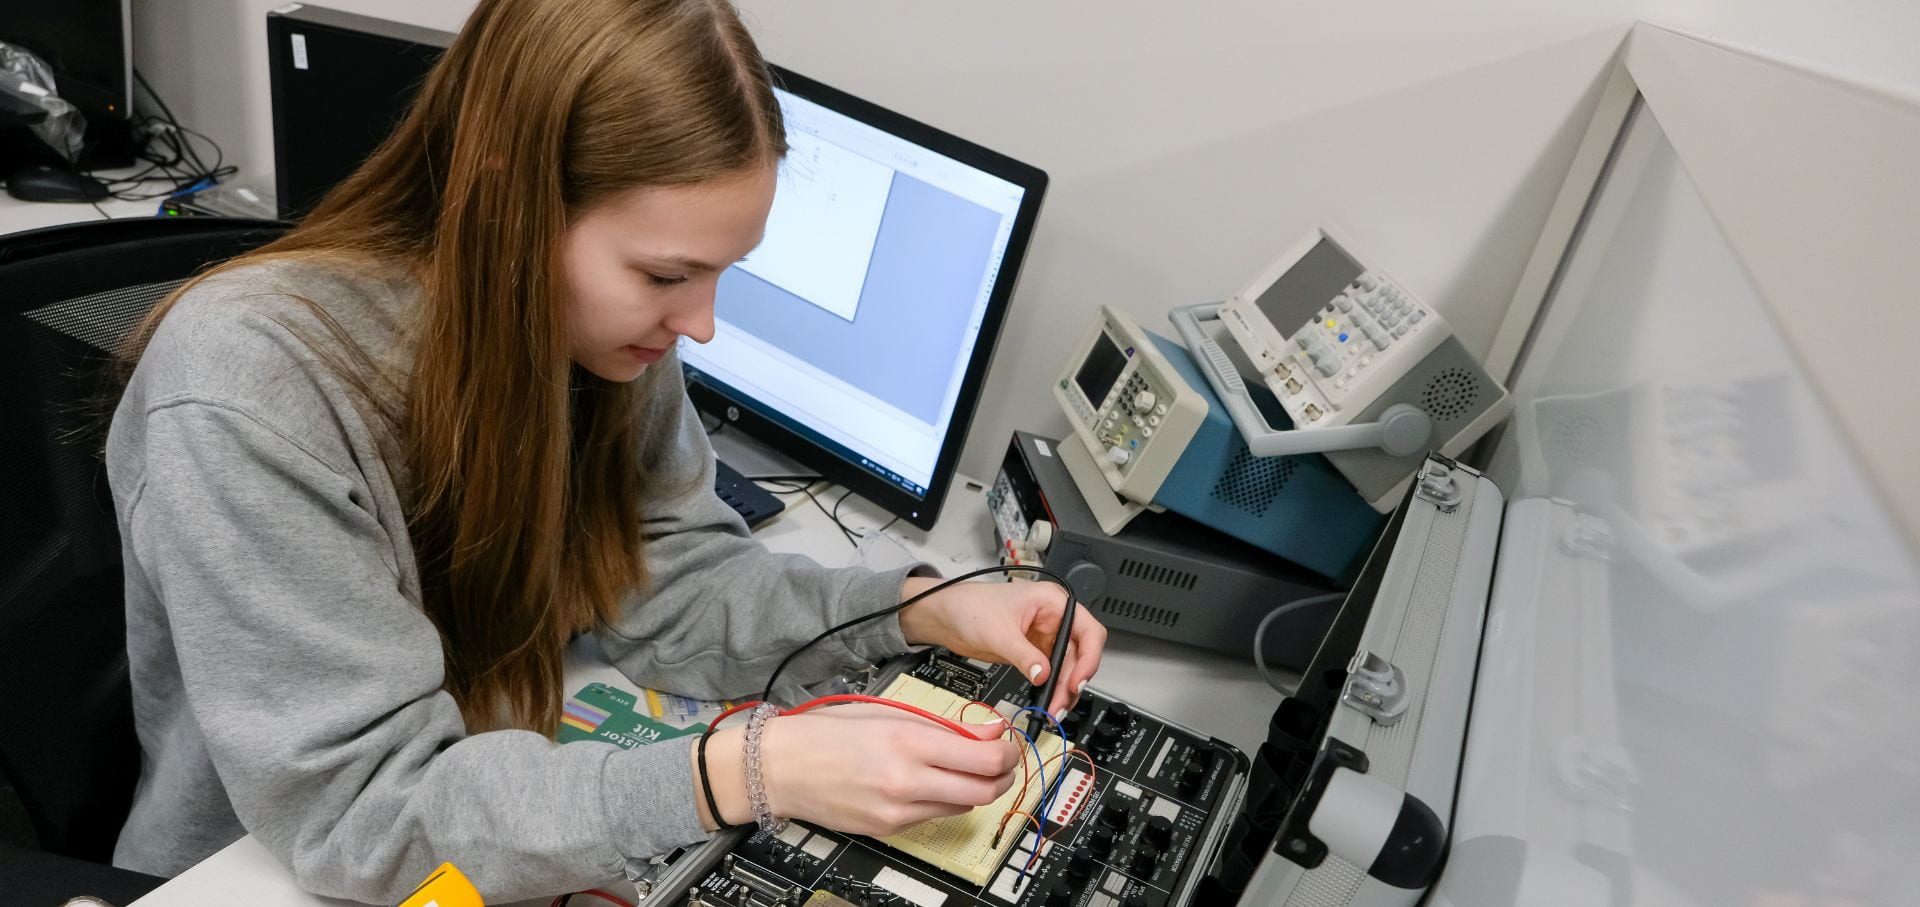 A female Electrical Engineering student uses a prototyping station to build and test circuits in Electrical Circuits I Lab at UW-Green Bay.